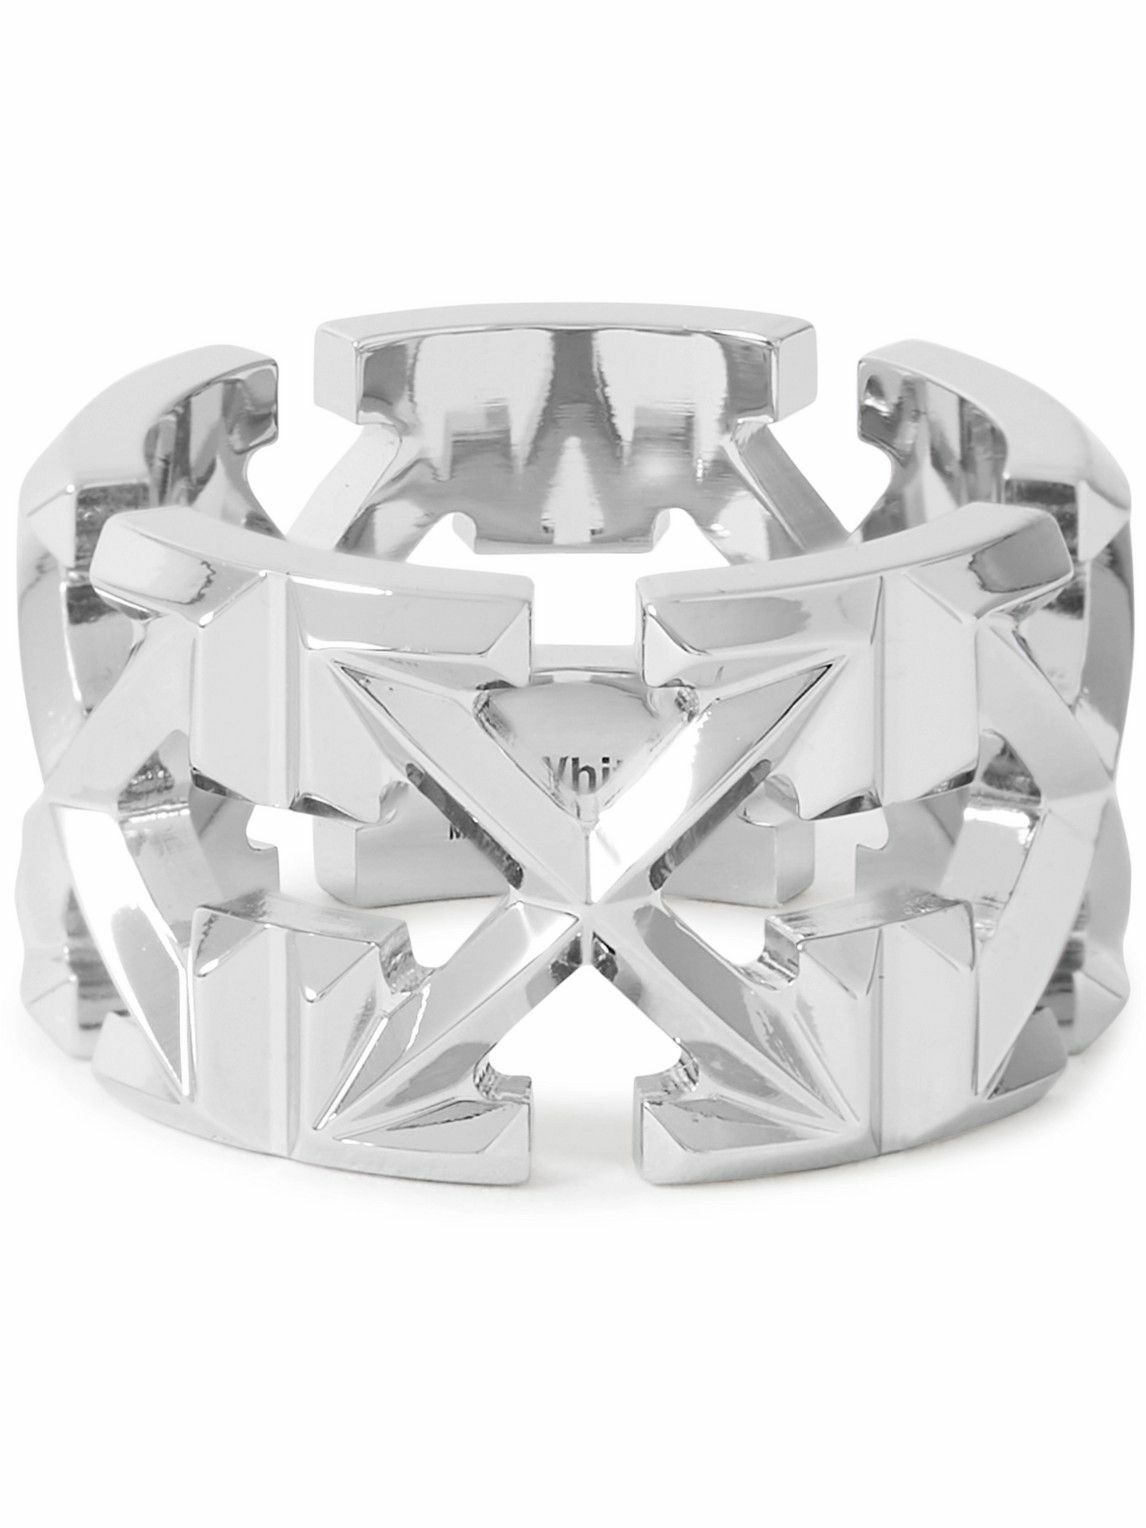 NWT OFF-WHITE C/O VIRGIL ABLOH Silver Texturized Hexnut Ring Set